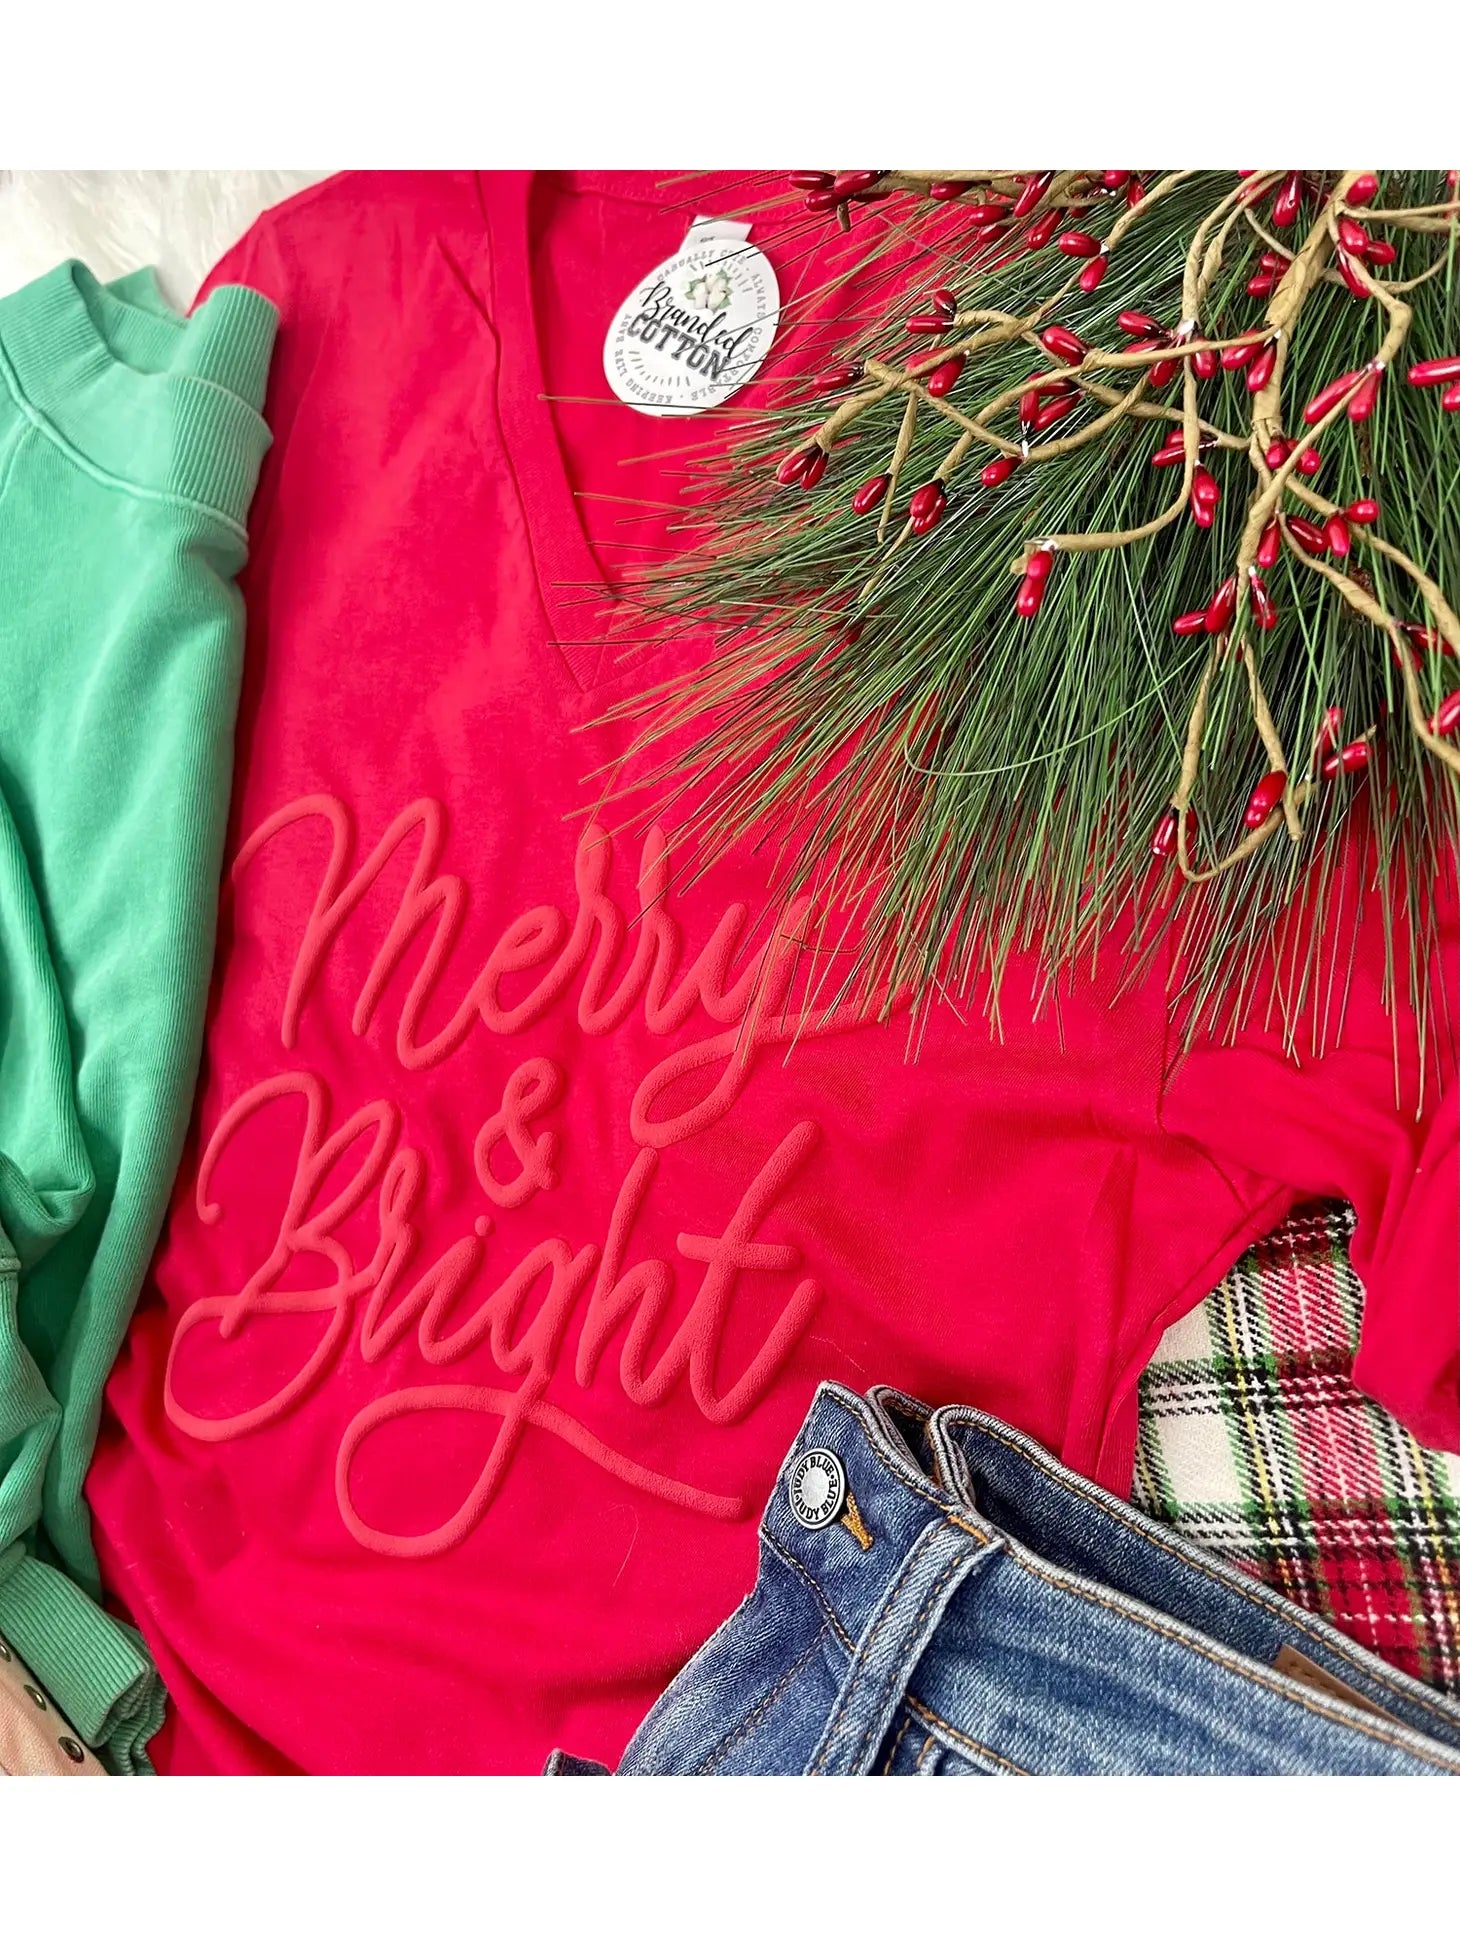 Merry & Bright Puff Tee - PREORDER